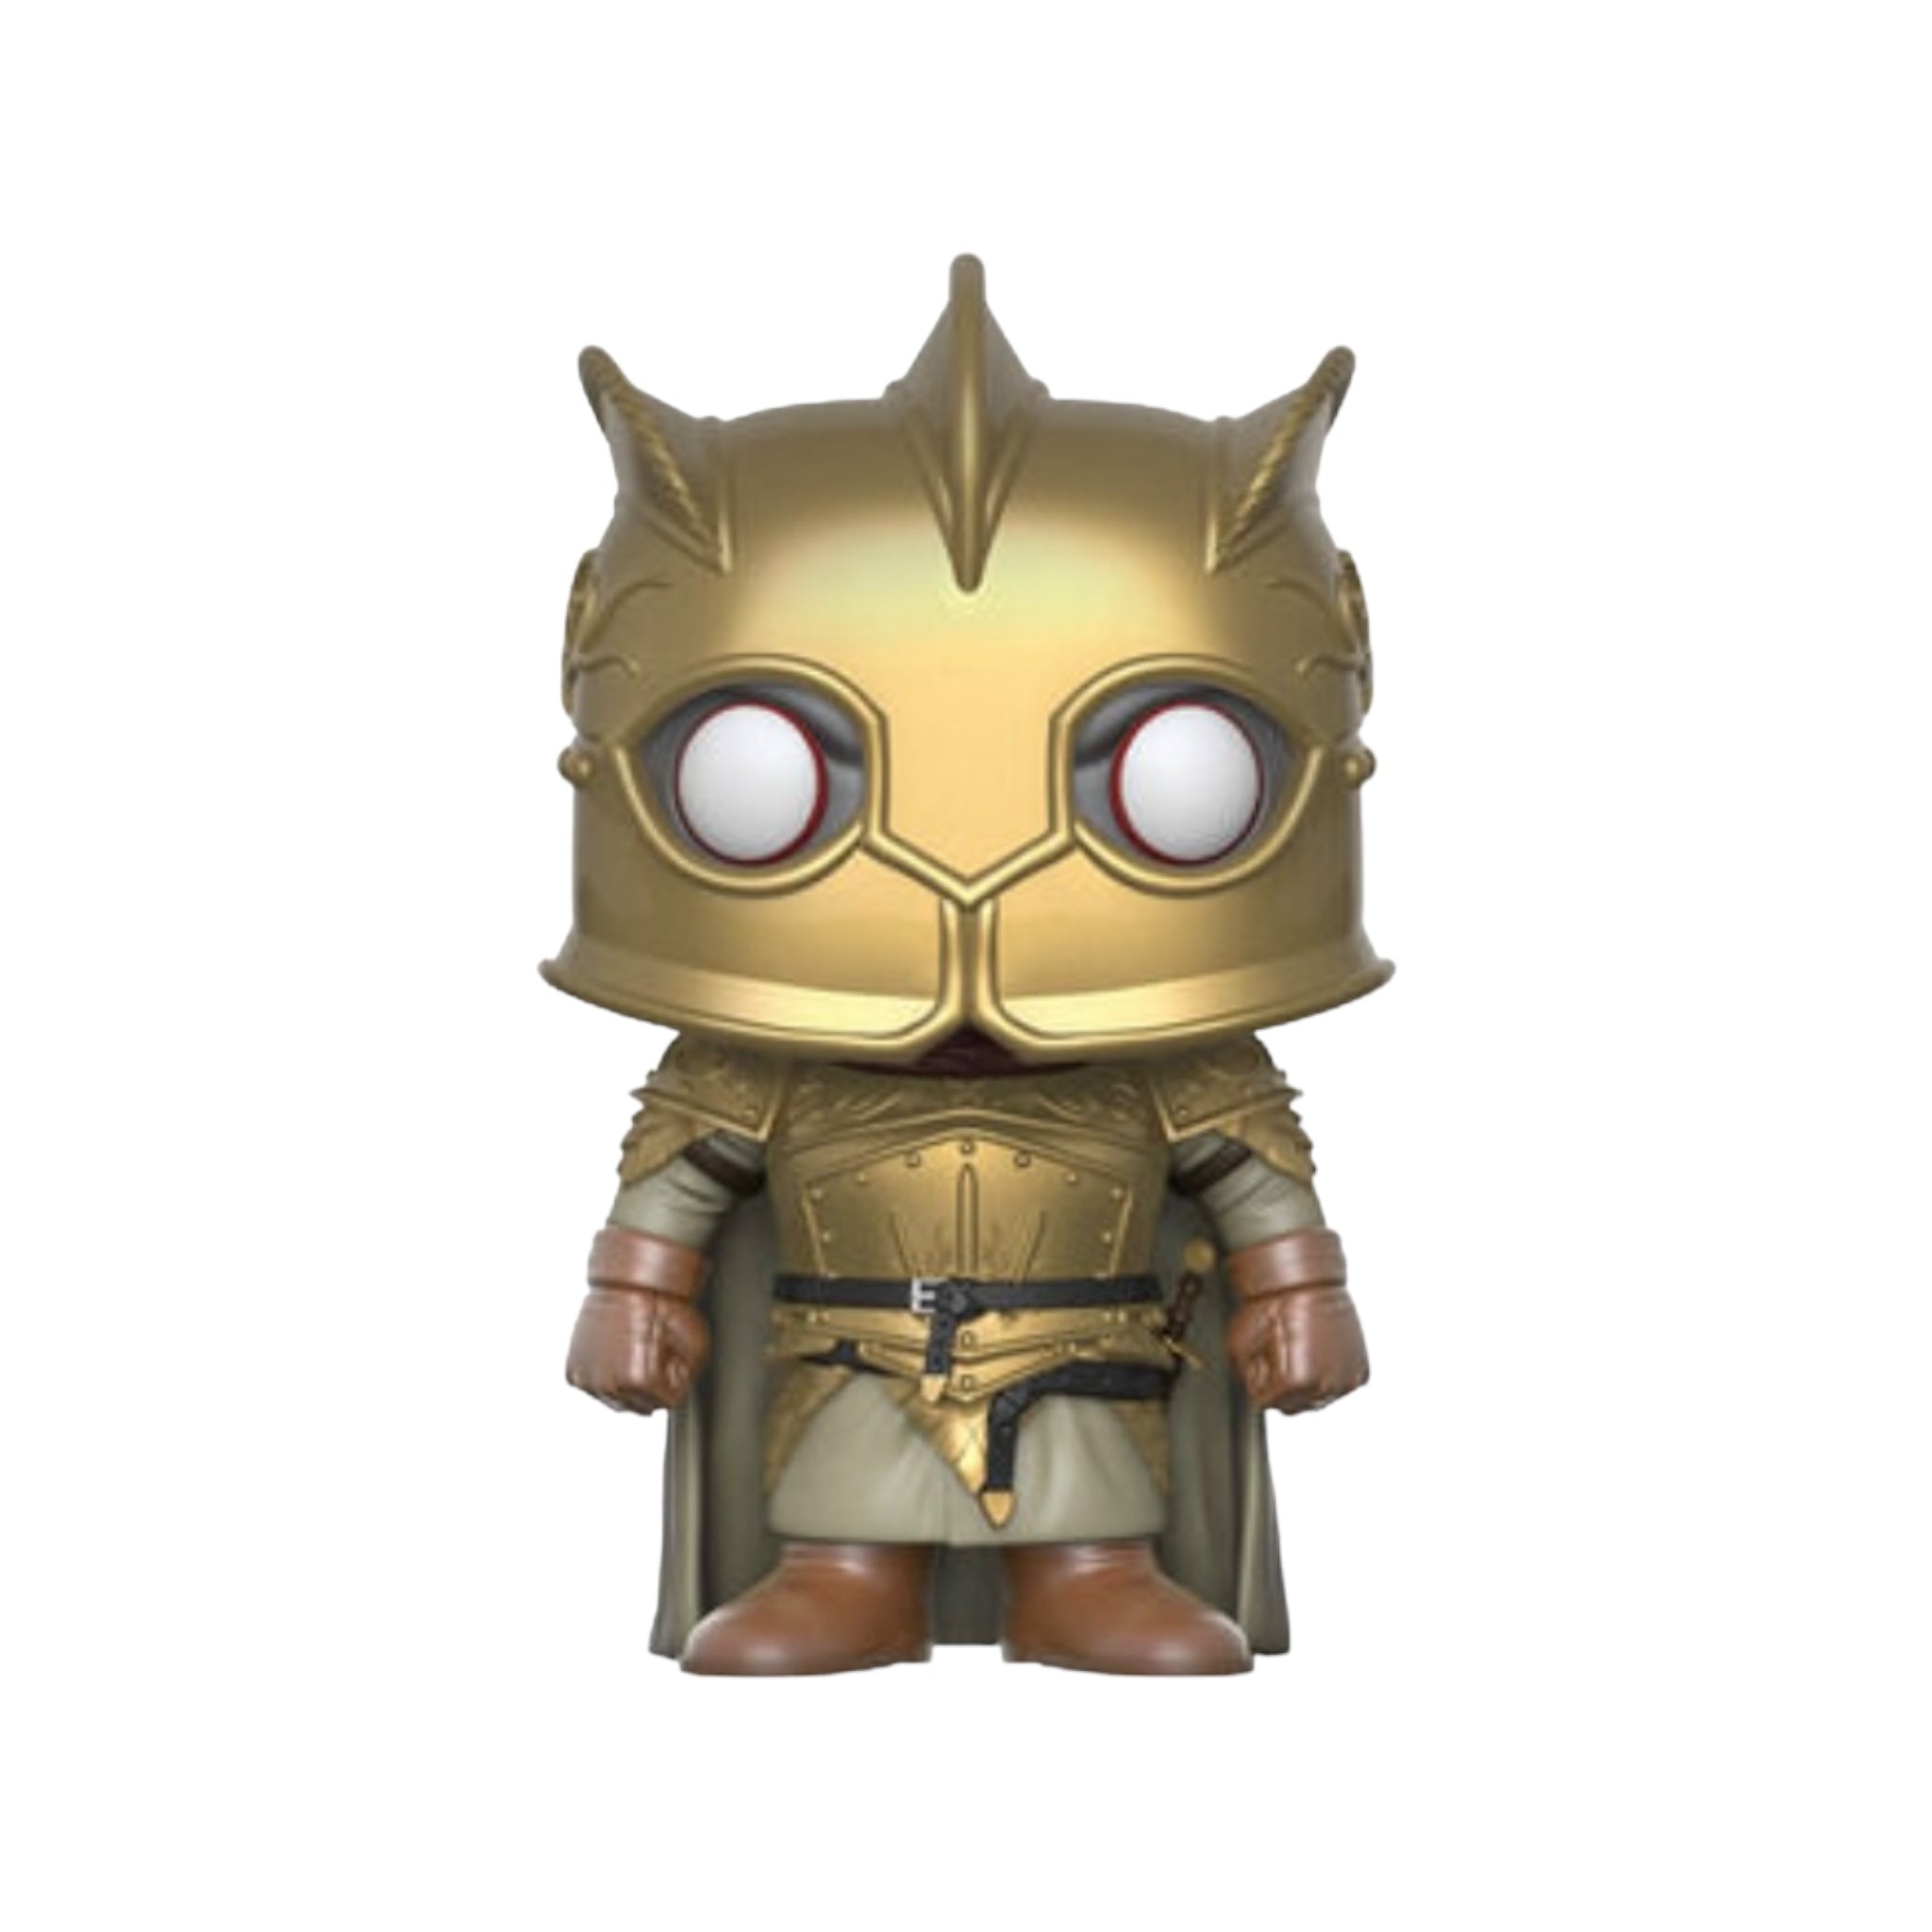 The Mountain [Armored] #54 (Gold) Funko Pop! - Game of Thrones - SDCC 2017 Shared Exclusive